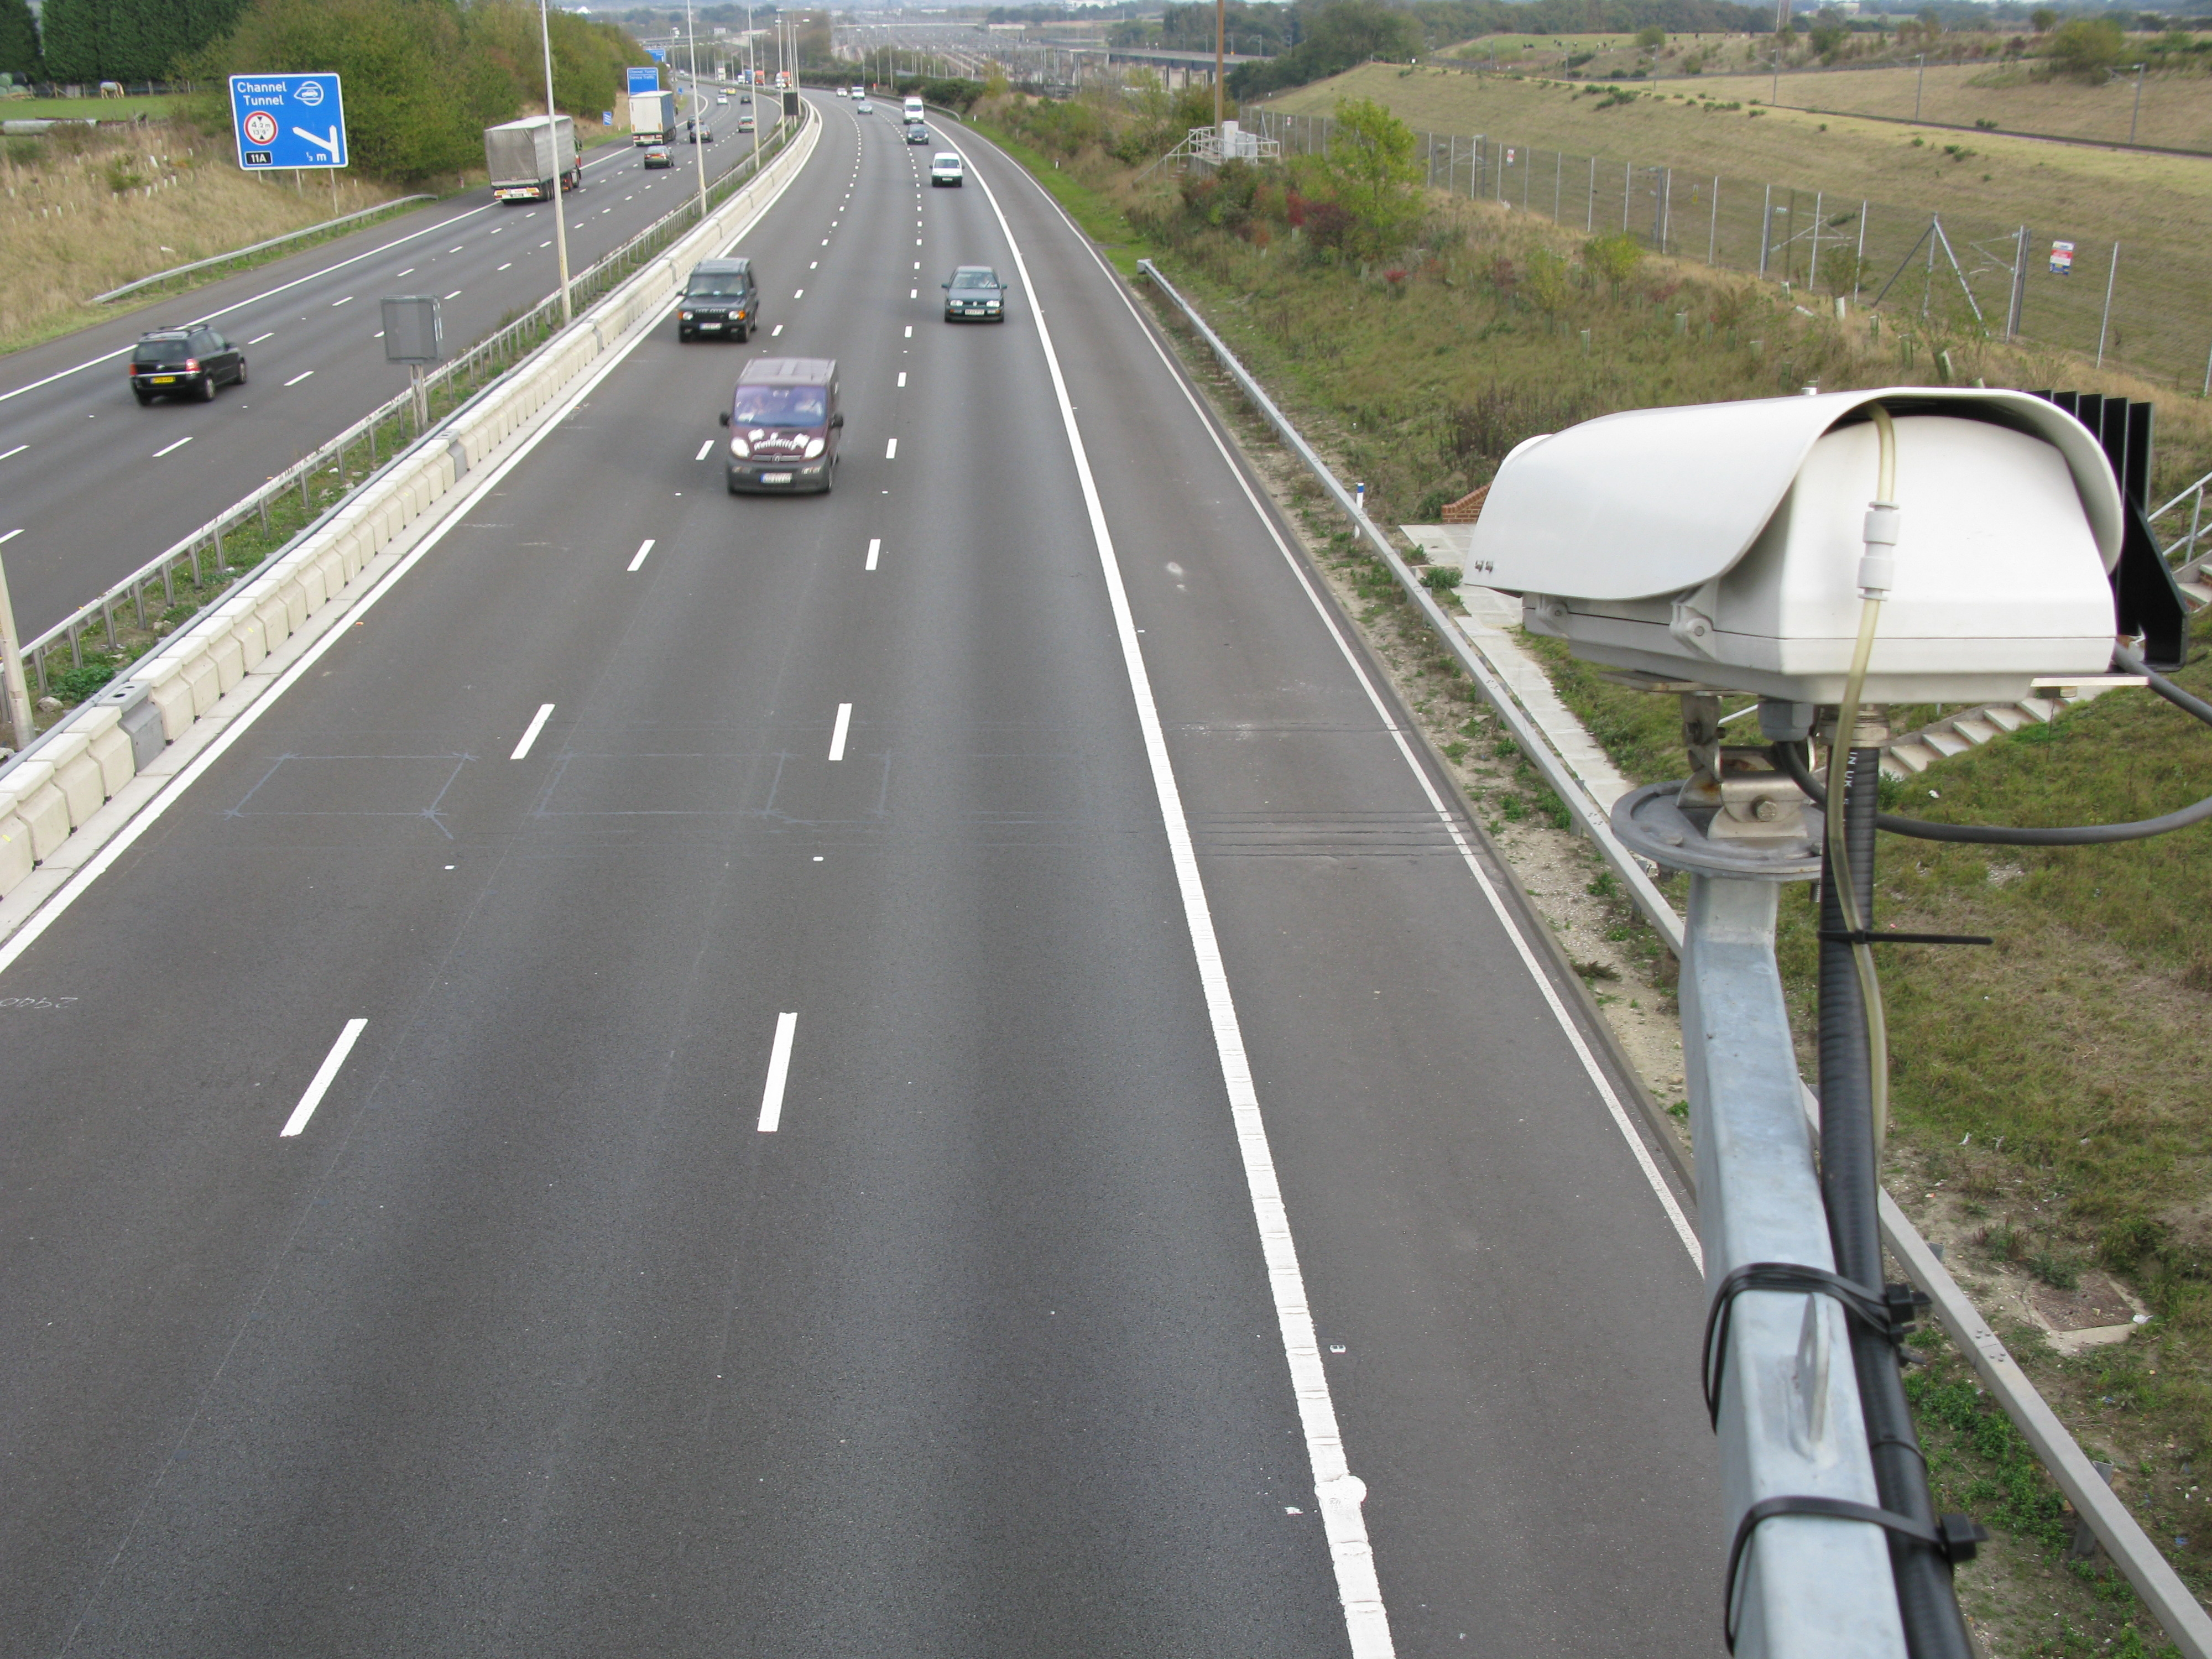 Project WASP's VIPER system was the first successful attempt to combine WIM and ANPR data at motorway speeds